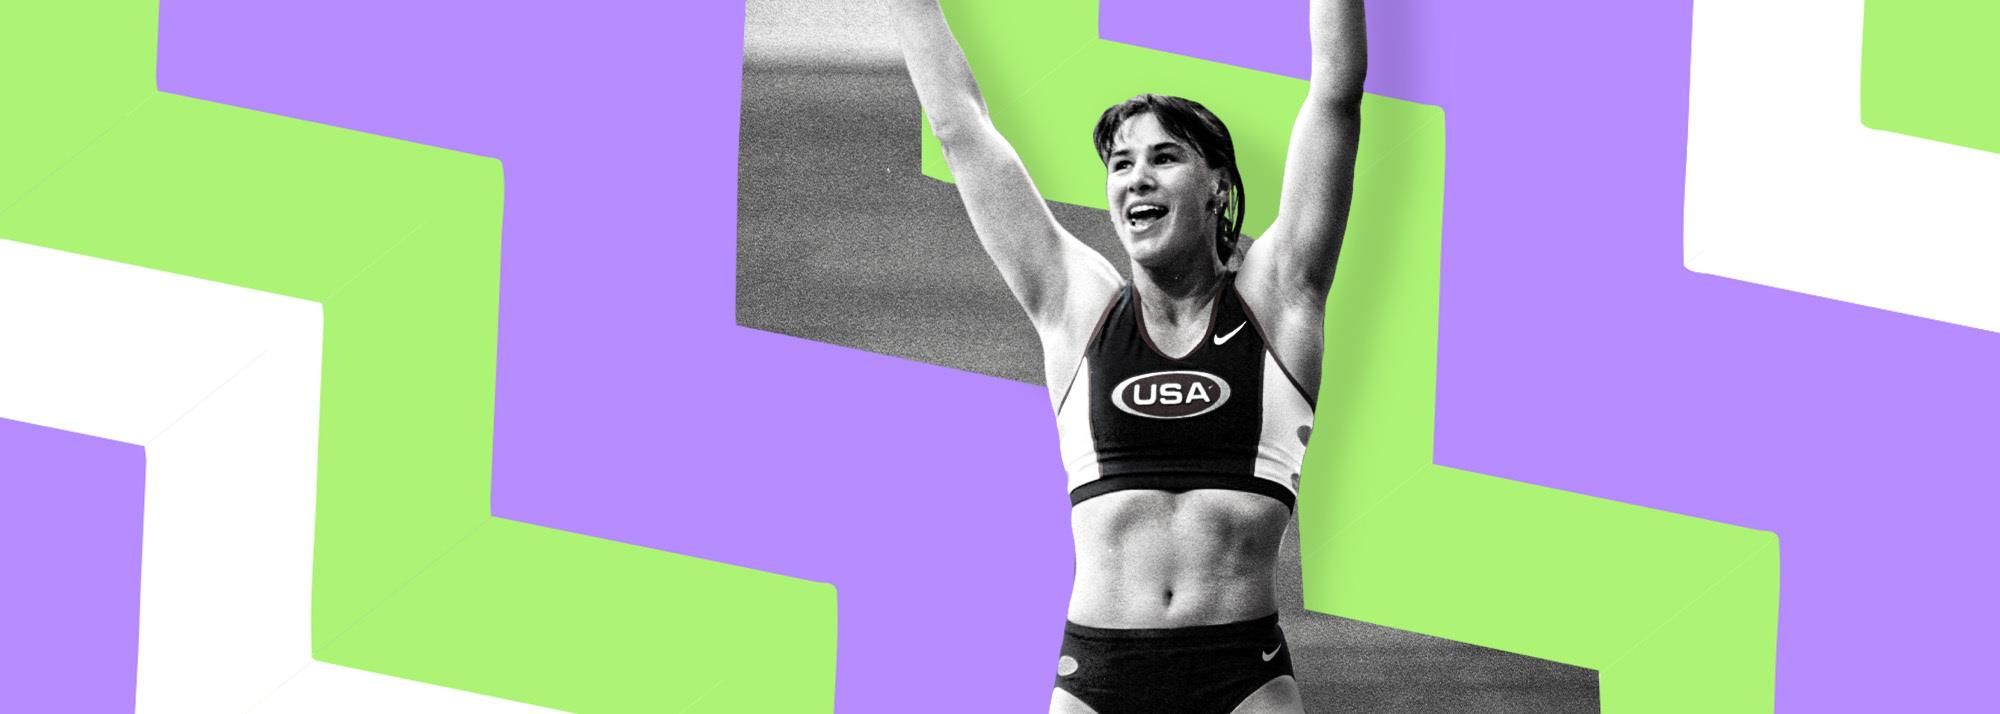 To have any gold medal in your trophy cabinet is rare enough, but to have the very first global one in your sport is rarer still. 24 years ago today, on 9 March 1997, Stacy Dragila soared over 4.60m to win the world indoor pole vault title in Paris, the first time the event had appeared on the women’s programme. 